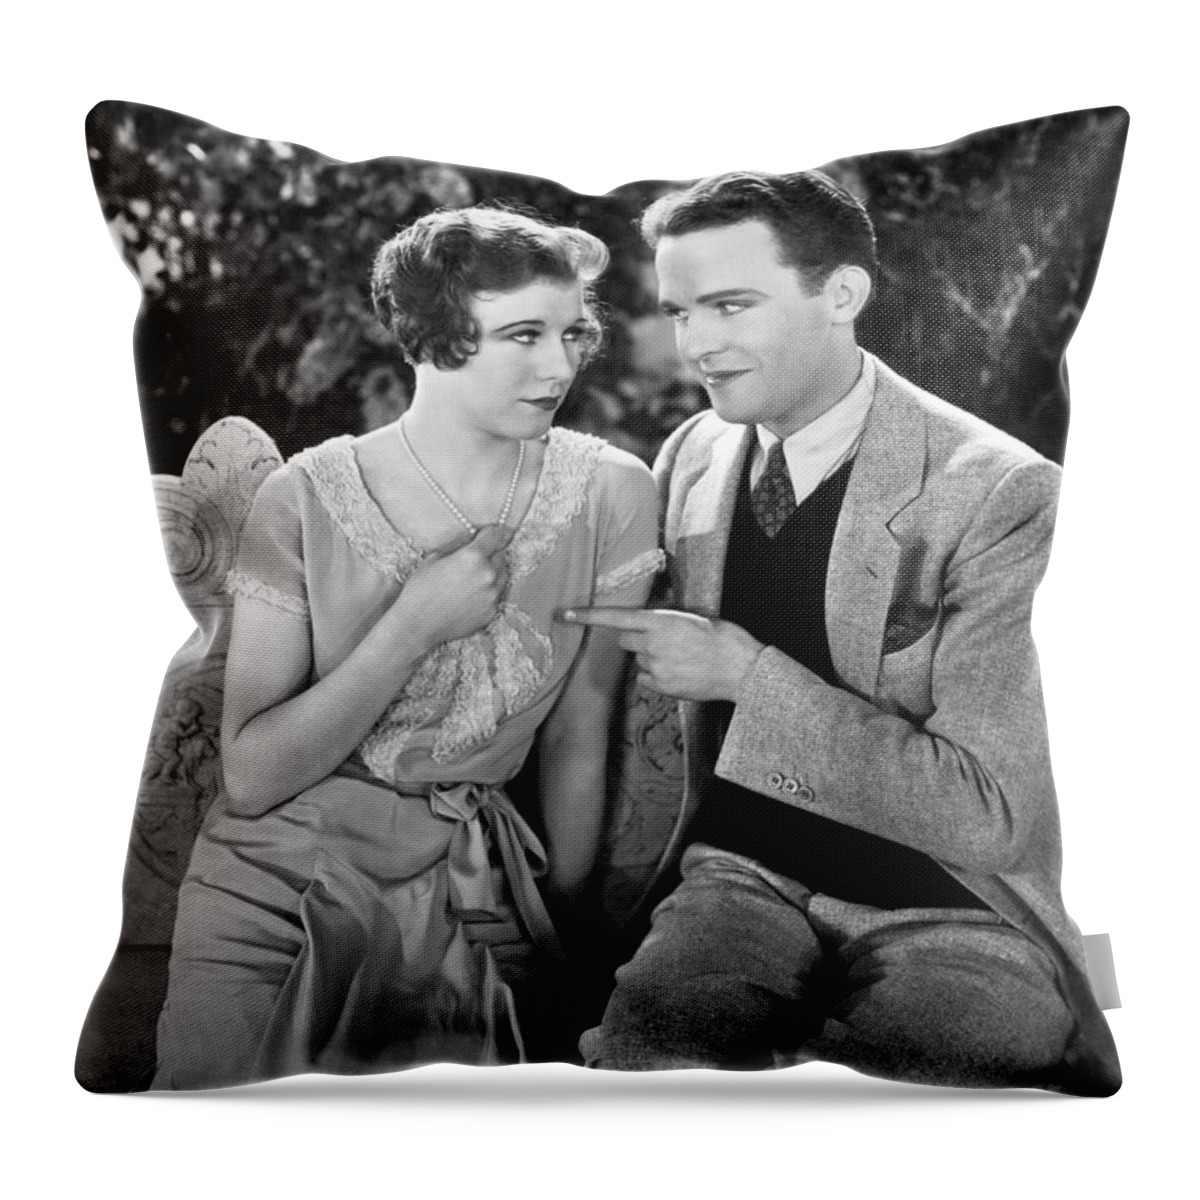 1035-786 Throw Pillow featuring the photograph A Couple Flirting by Underwood Archives